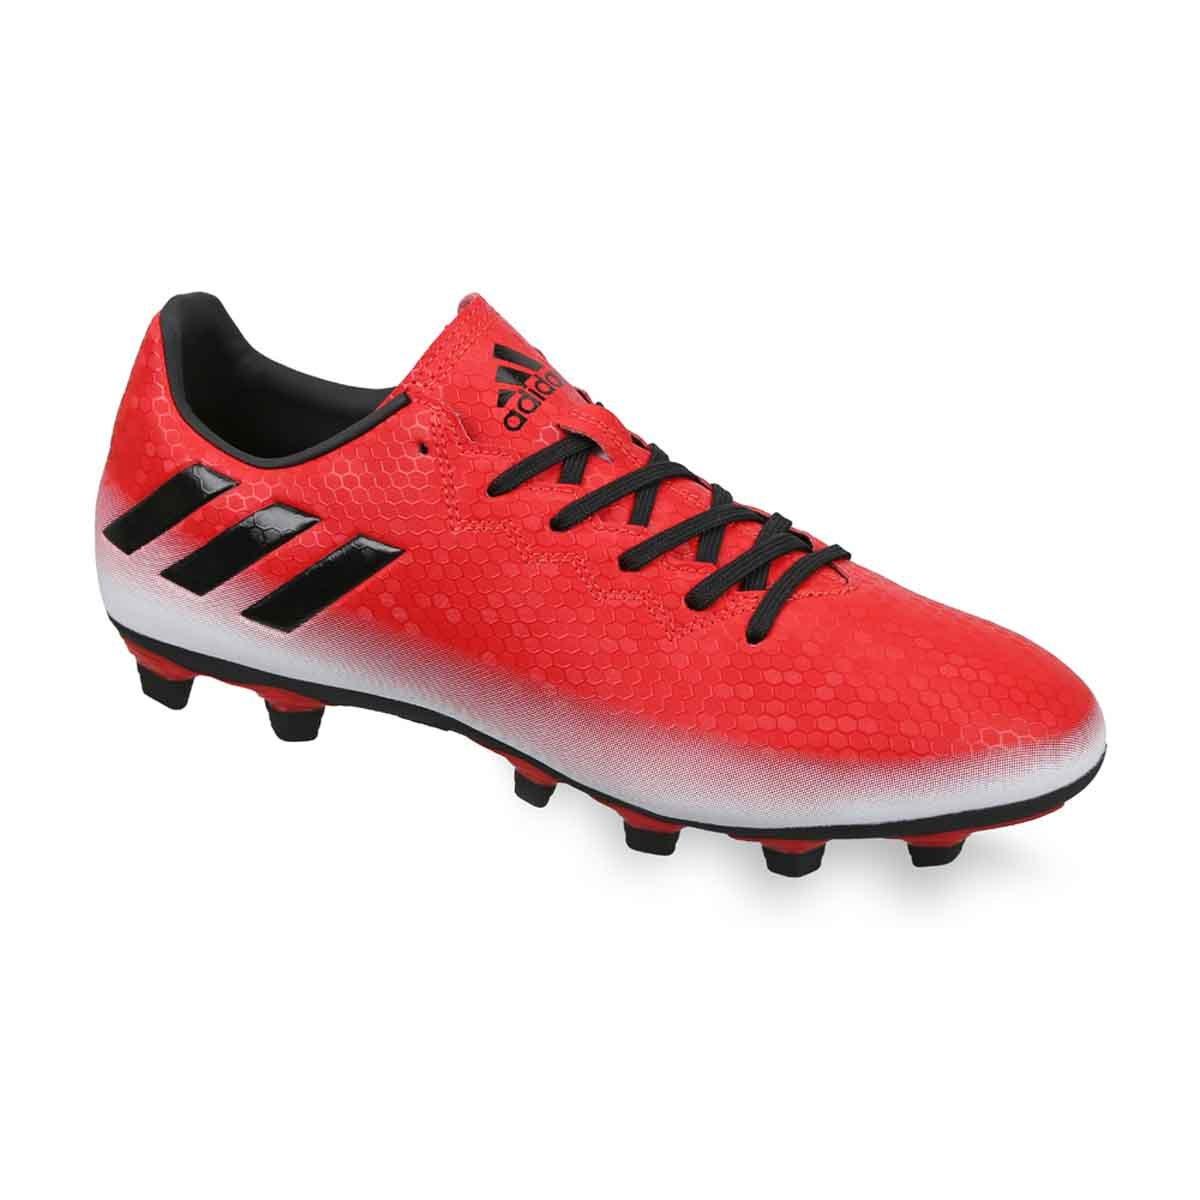 Buy Adidas Messi 16.4 Men's Football Shoes Online India